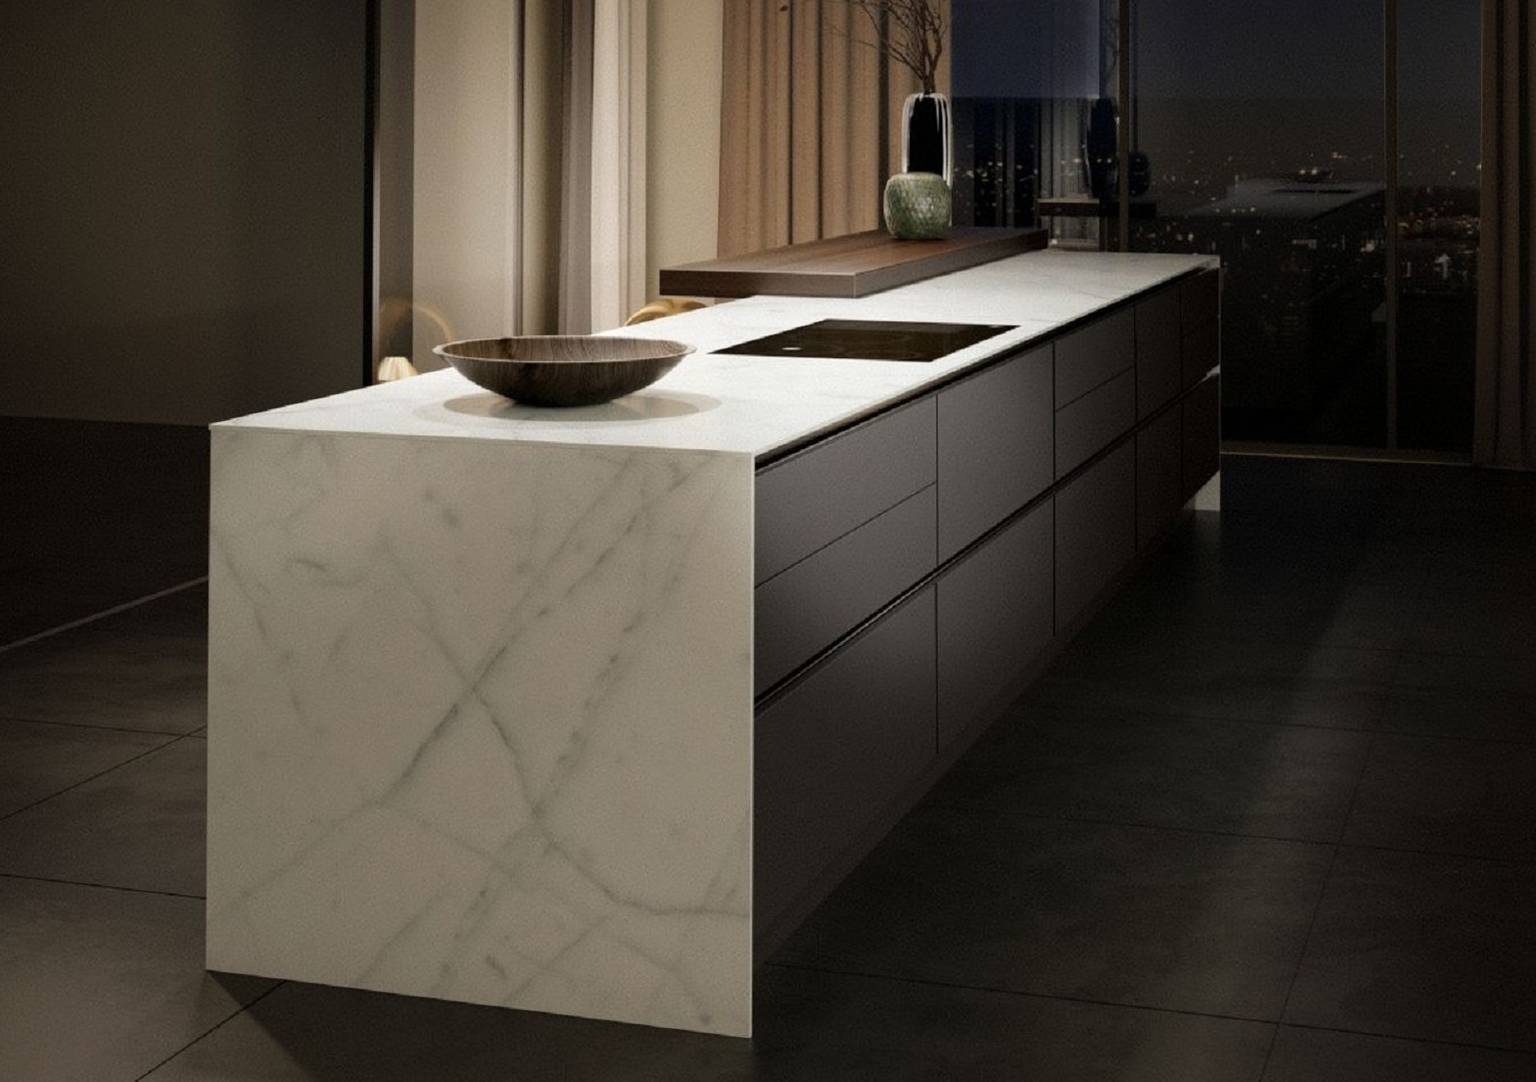 Spacious SieMatic Pure S2 SE kitchen island with 1 cm countertop and side panels in marble